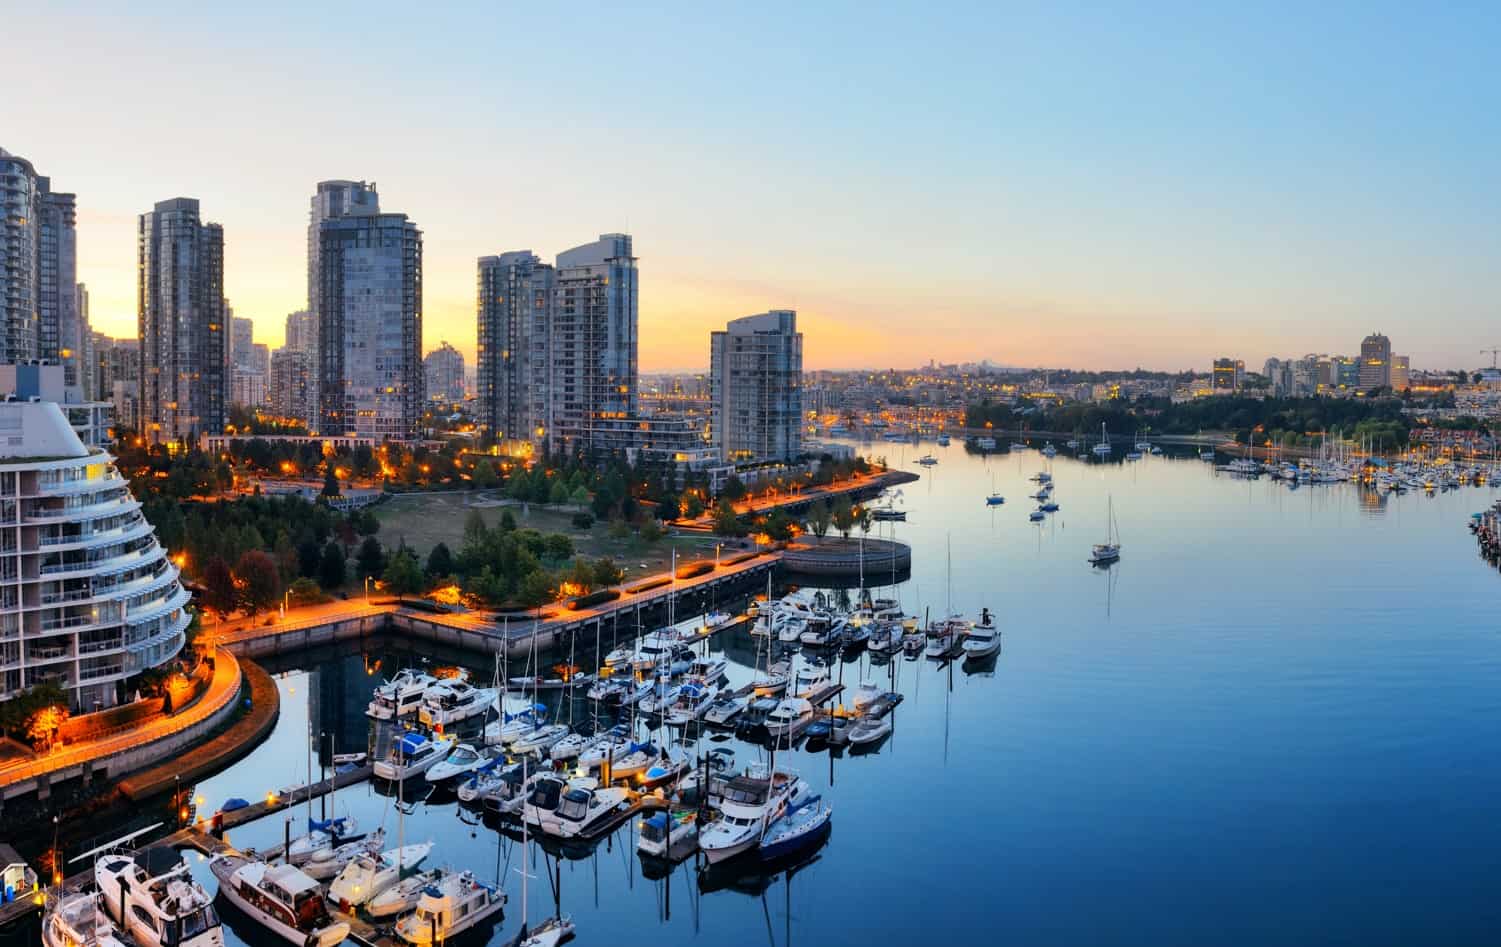 Explore the breathtaking views of Vancouver with Burrard Queen scenic routes